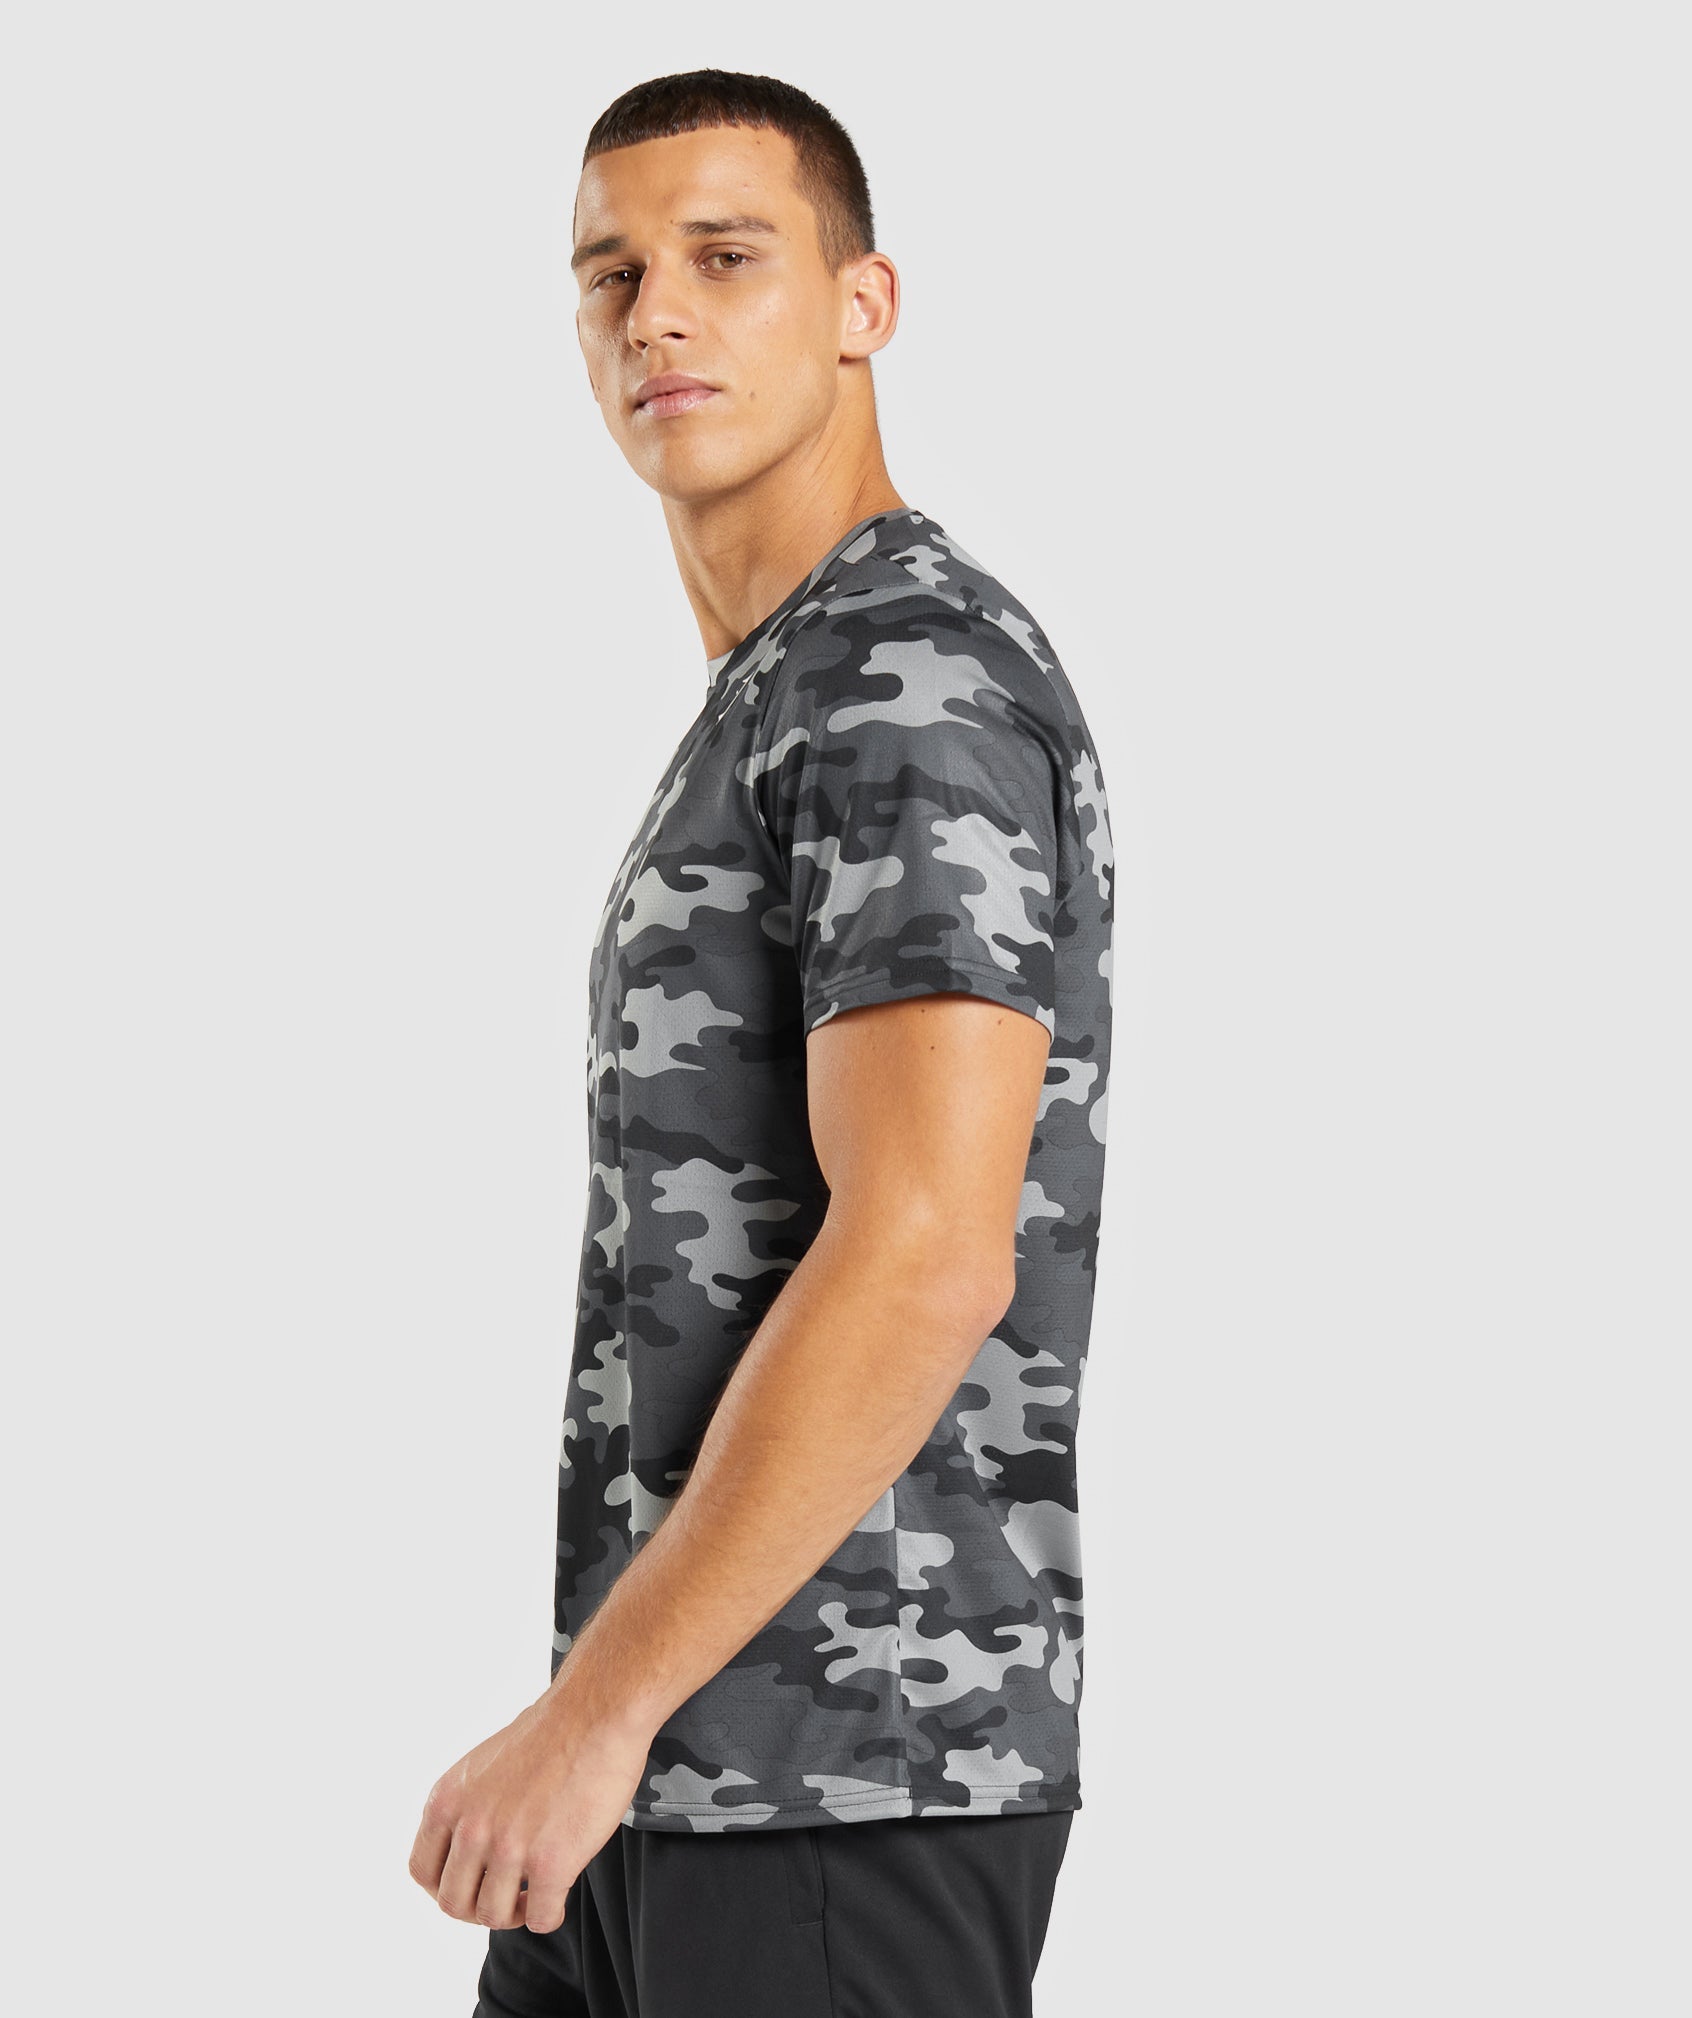 Arrival T-Shirt in Grey Print